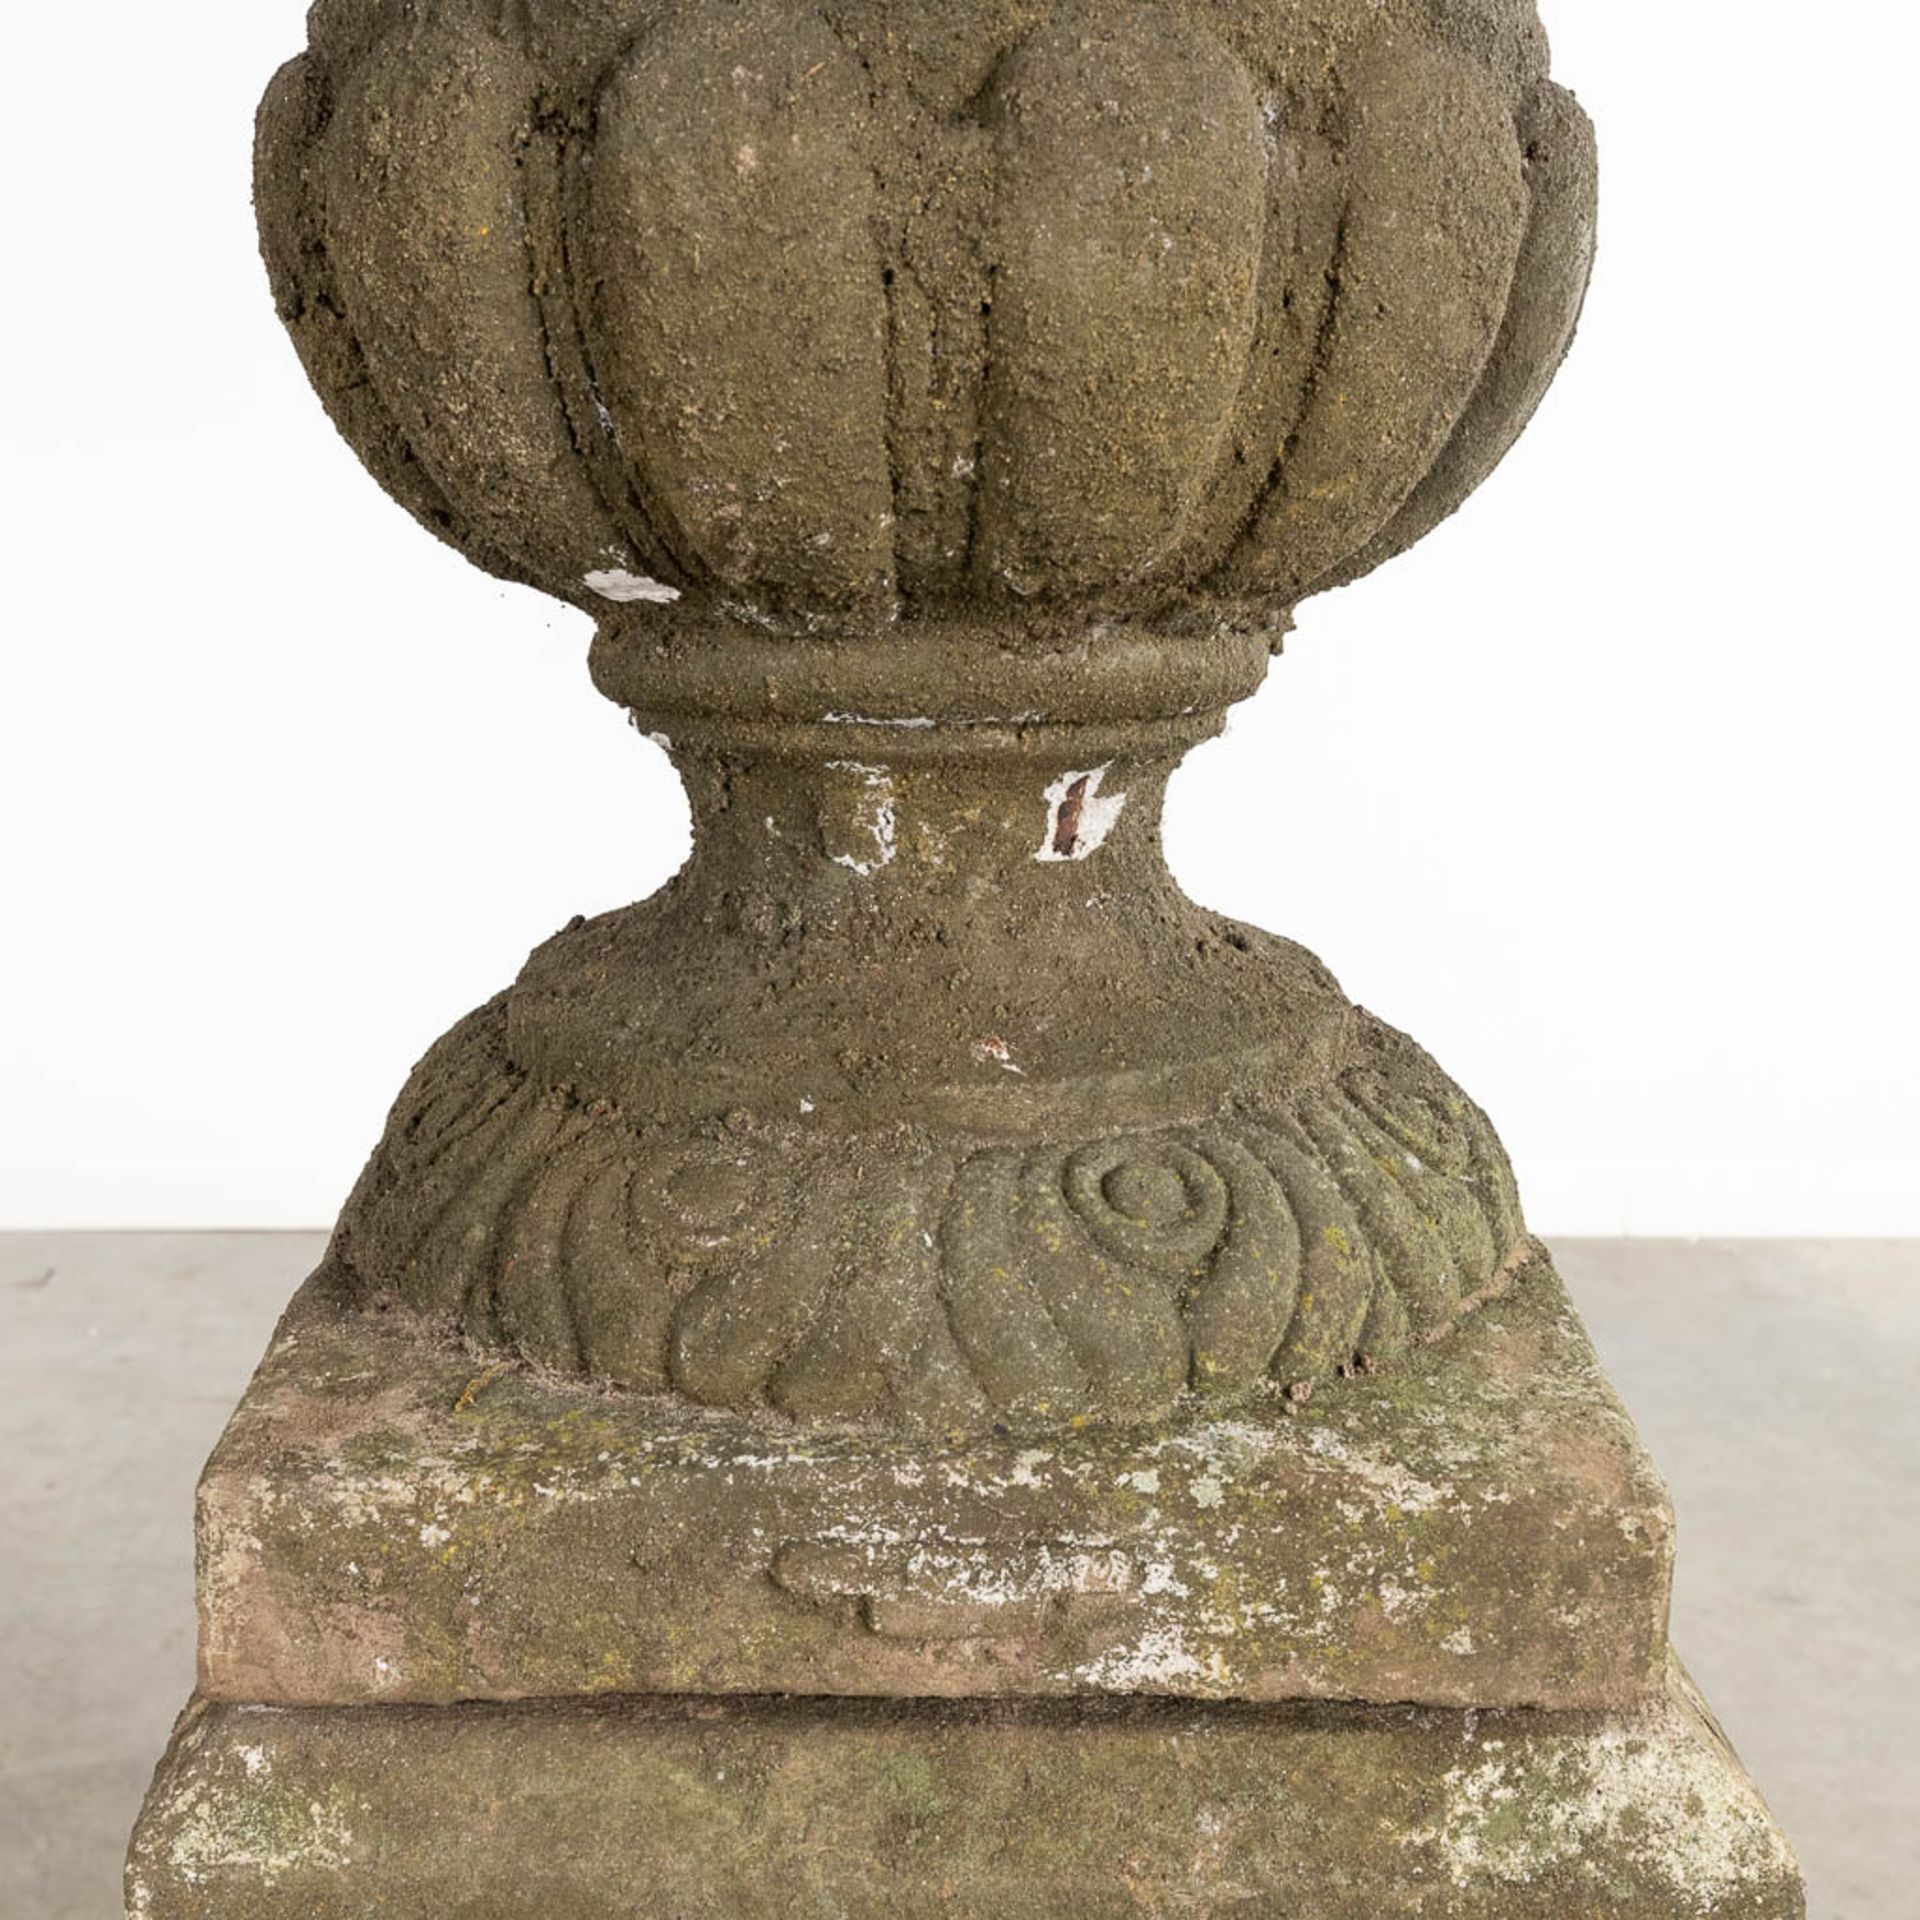 A pair of large urns with a lid, standing on a pedestal, concrete, 20th C. (D:50 x W:67 x H:173 cm) - Image 6 of 8